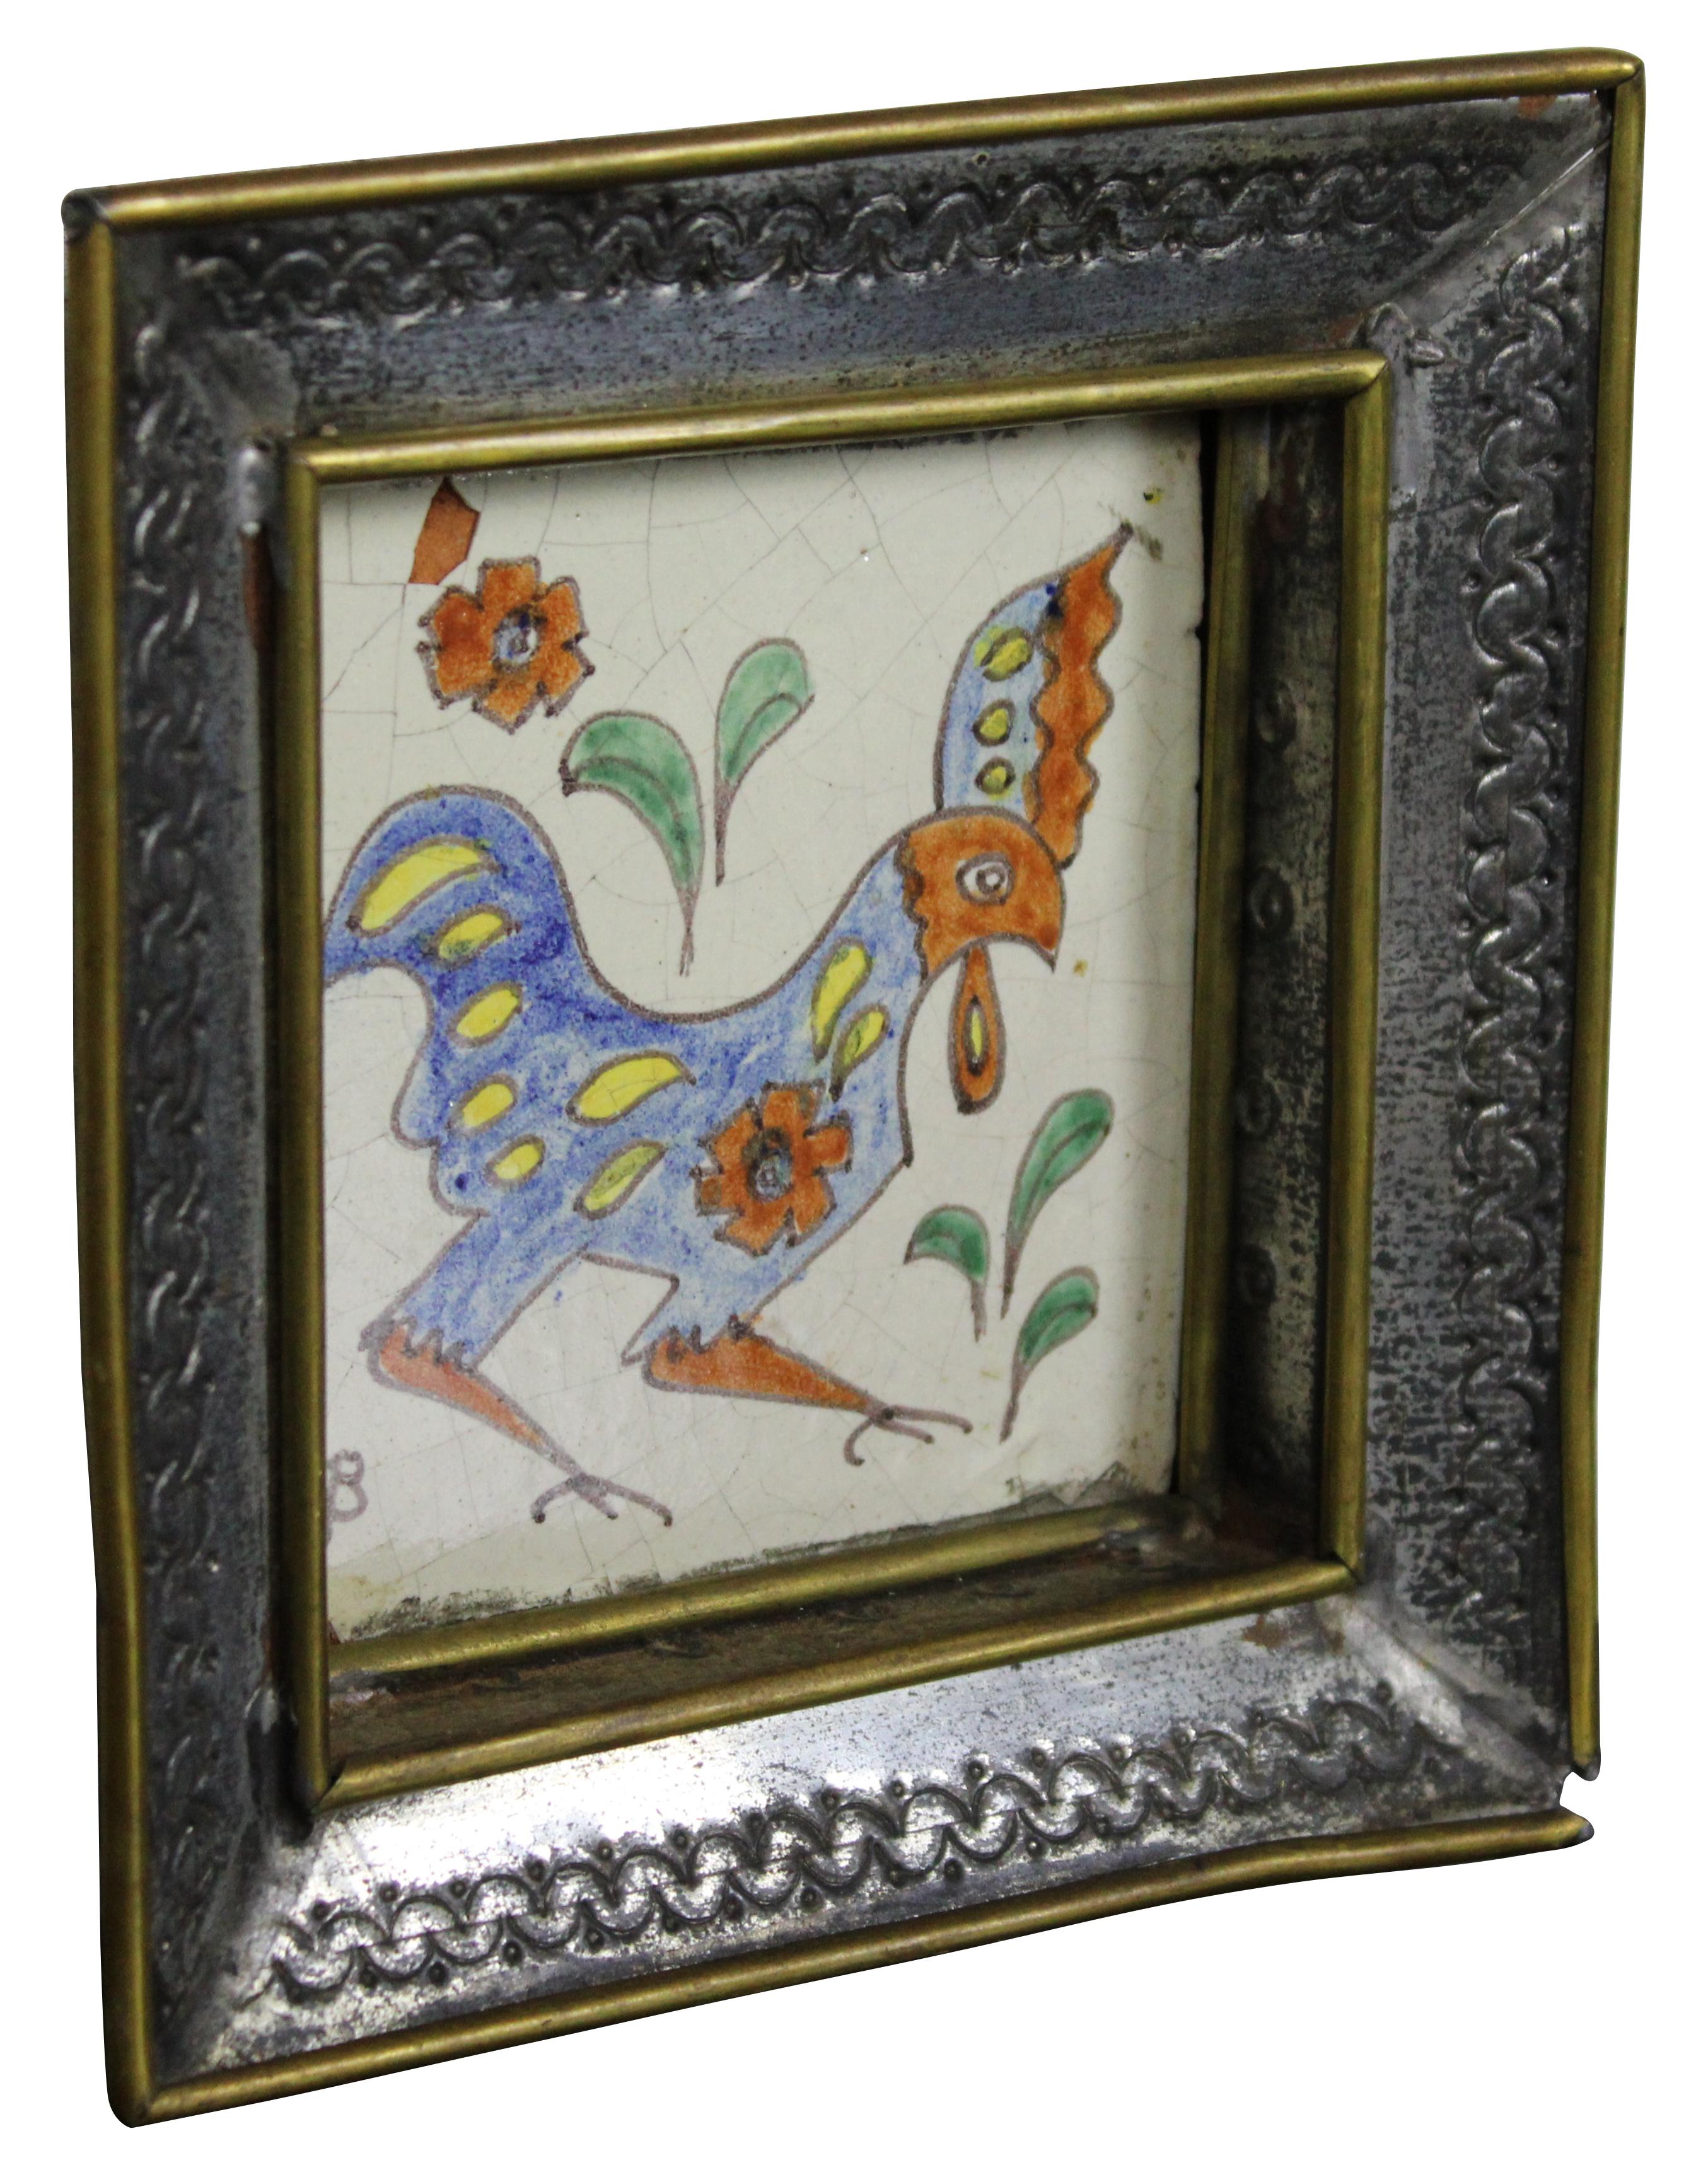 1940’s mid century ceramic hand painted rooster tile by Gene Byron, framed in a tin and brass tooled dish or tray shaped frame.

Measures: 6” x 1.5” x 6.25” / Sans Frame - 3.75” x 4” (Width x Depth x Height).